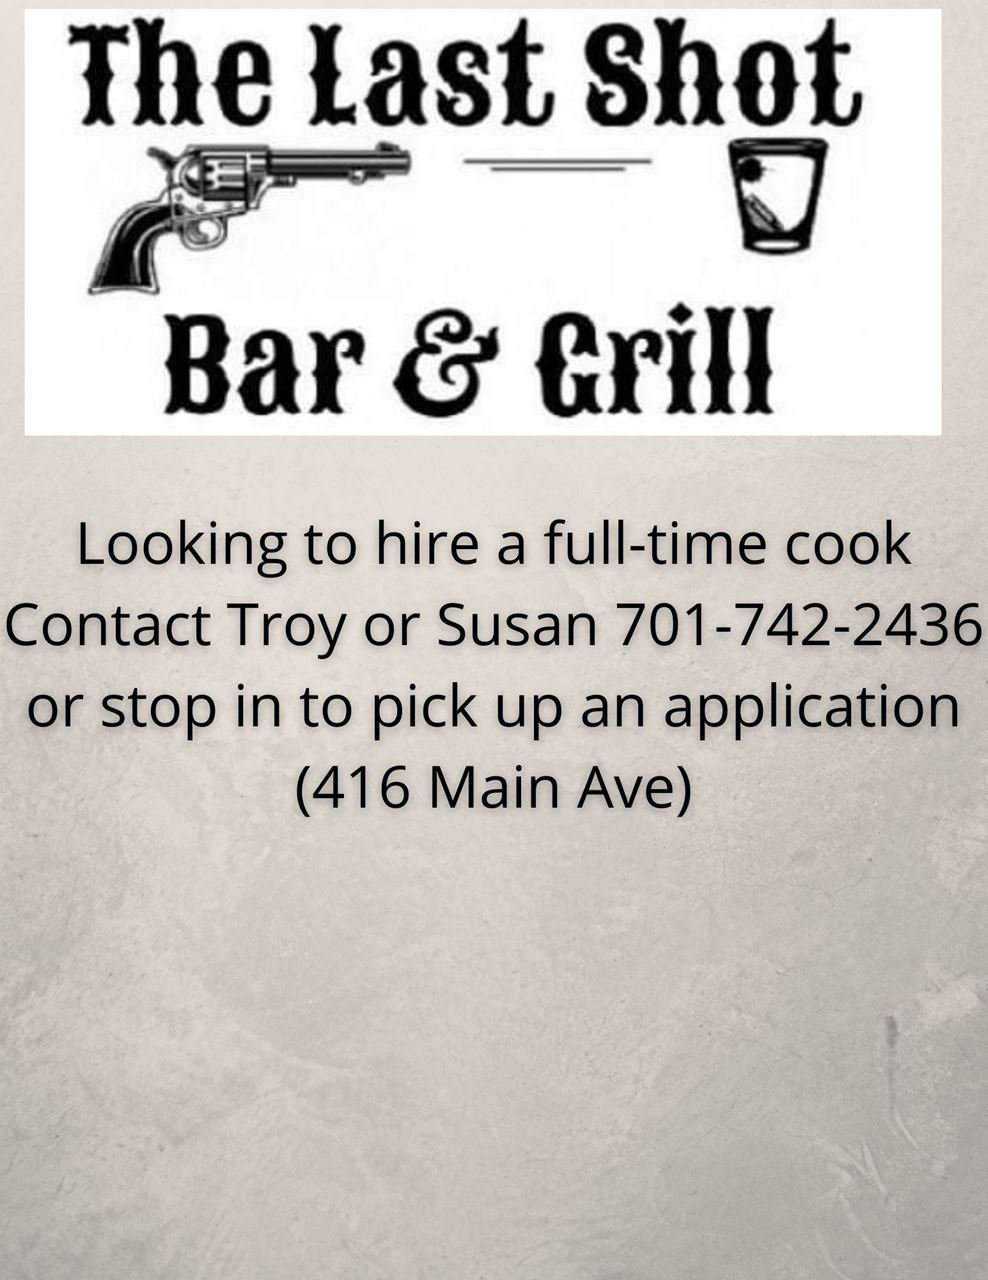 Cook at The Last Shot Bar & Grill